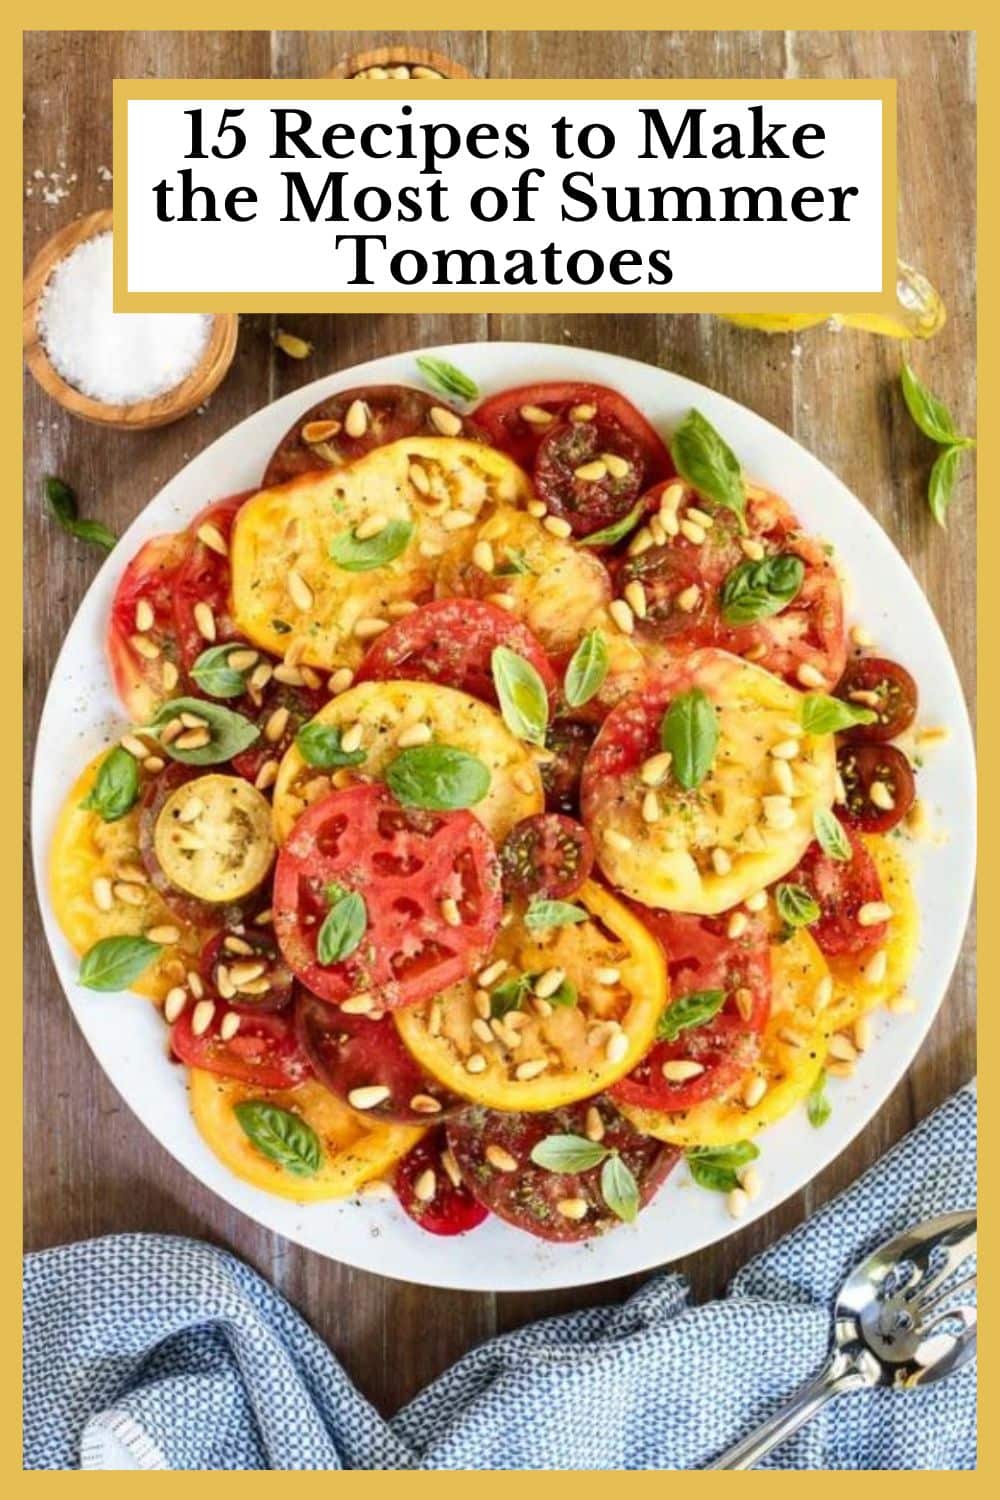 Caprese and Beyond - 15 Delicious Recipes for Those Glorious Summer Tomatoes!